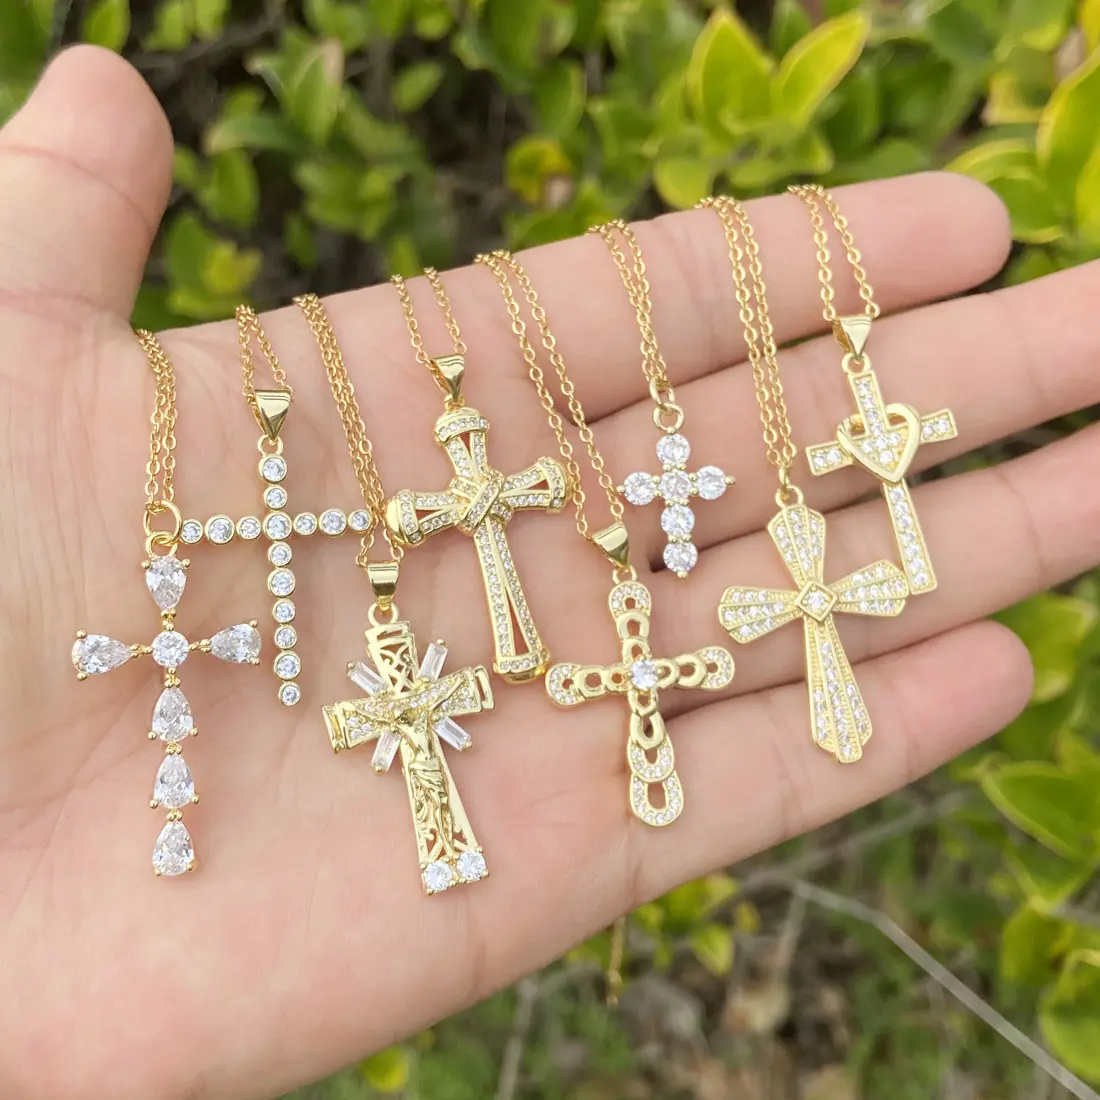 2022 Women Fashion Jewelry Delicate Personality Hip Hop 18K Gold Micro-Pave Zircon Cross Pendant Necklaces